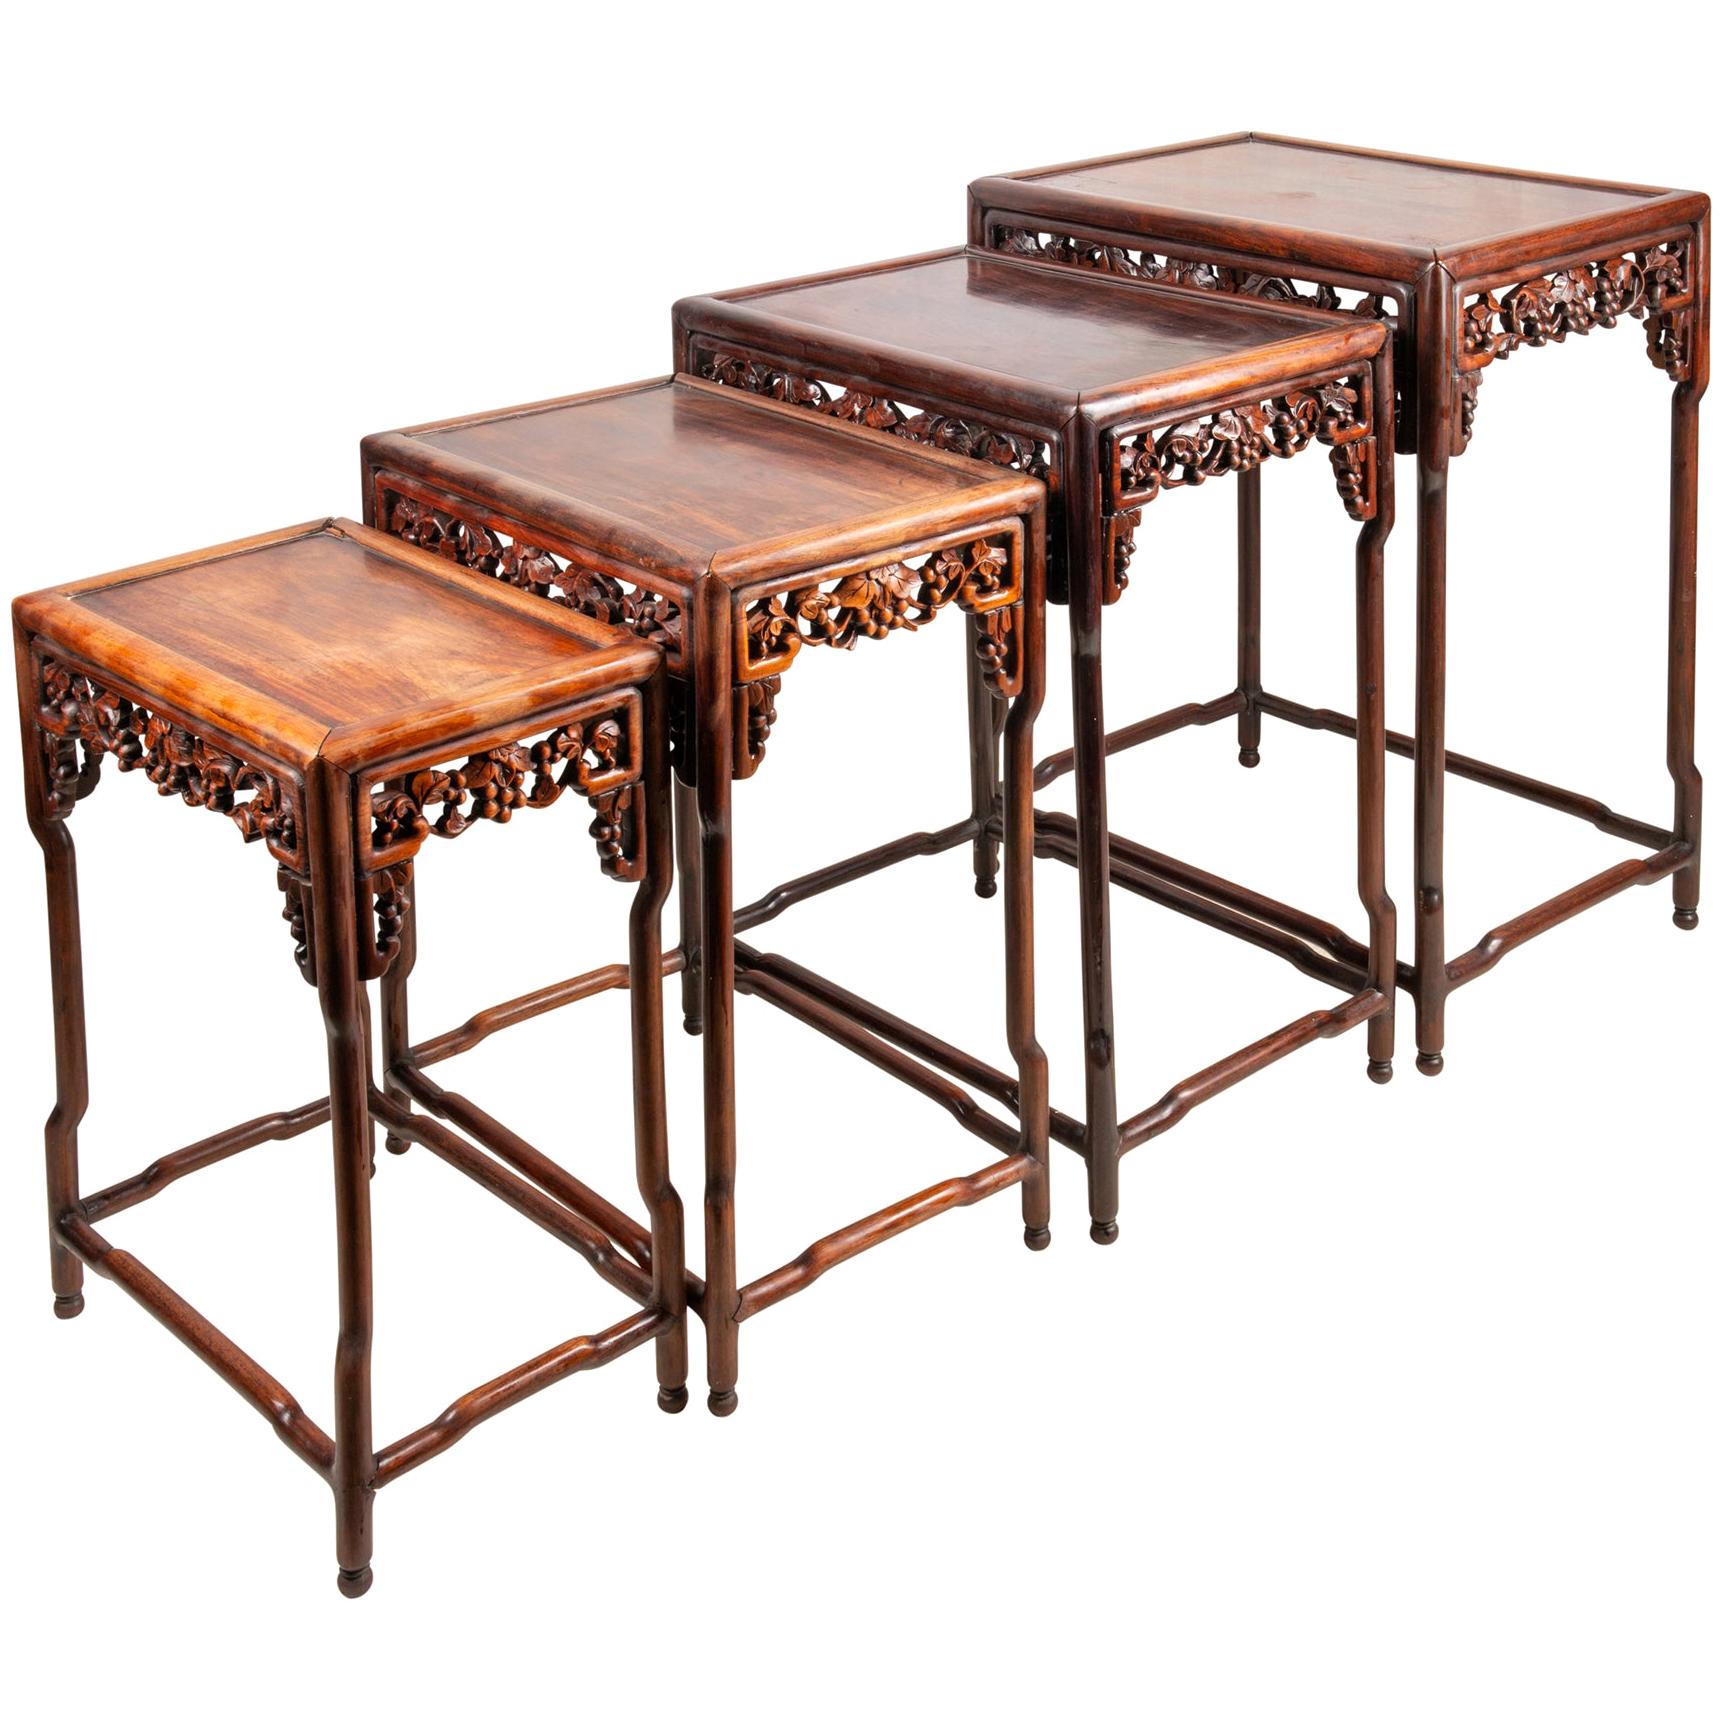 Nest of Four Chinese Hardwood Tables, circa 1880